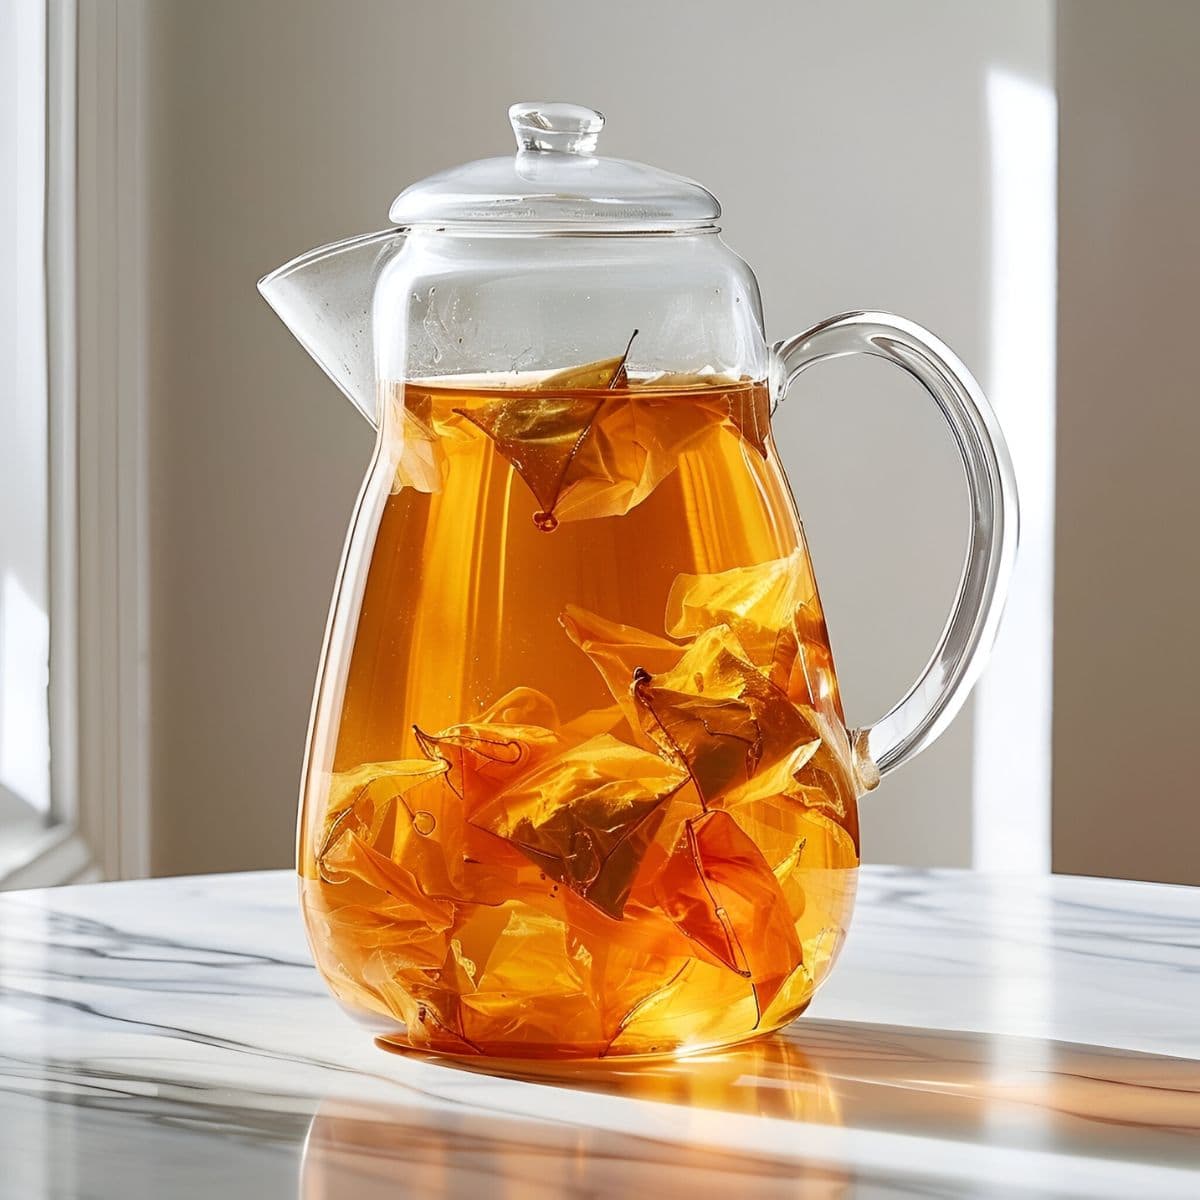 Pitcher of Sun Tea with Tea Bags Sitting in the Sunshine on a White Marble Table